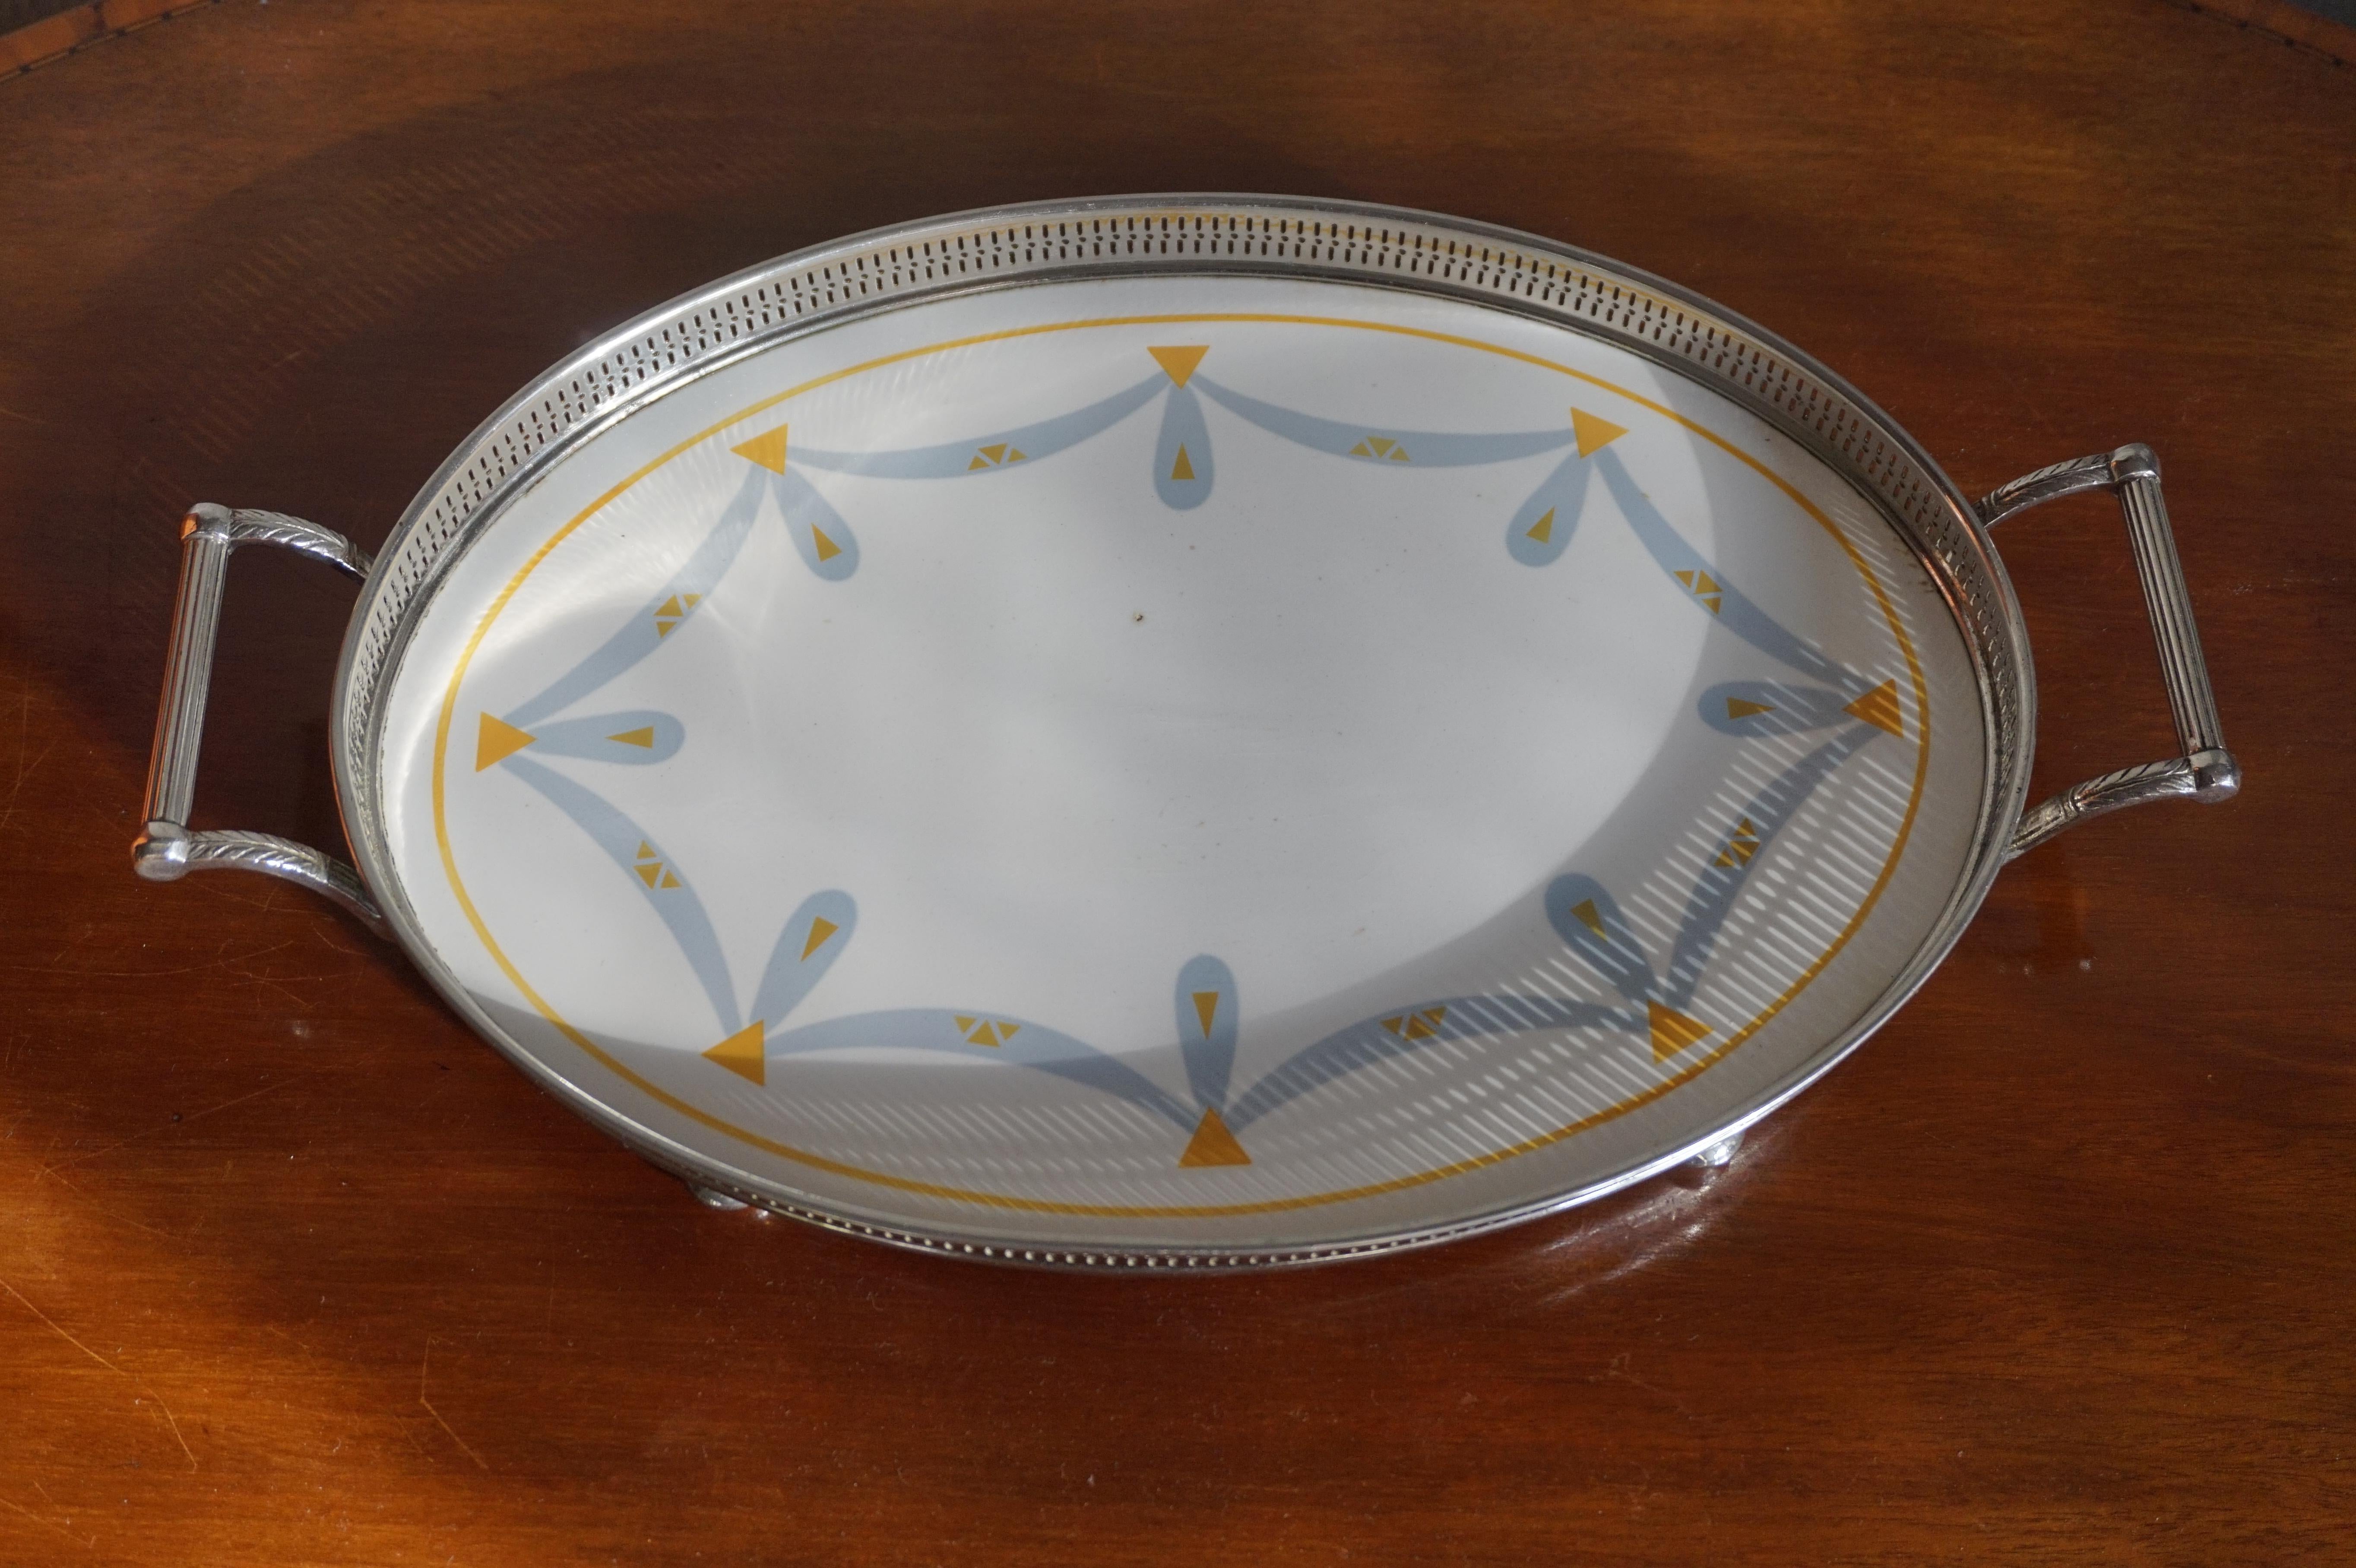 Small Art Deco Oval Porcelain Tile Serving Tray with Stylish Yellow & Gray Motif For Sale 10